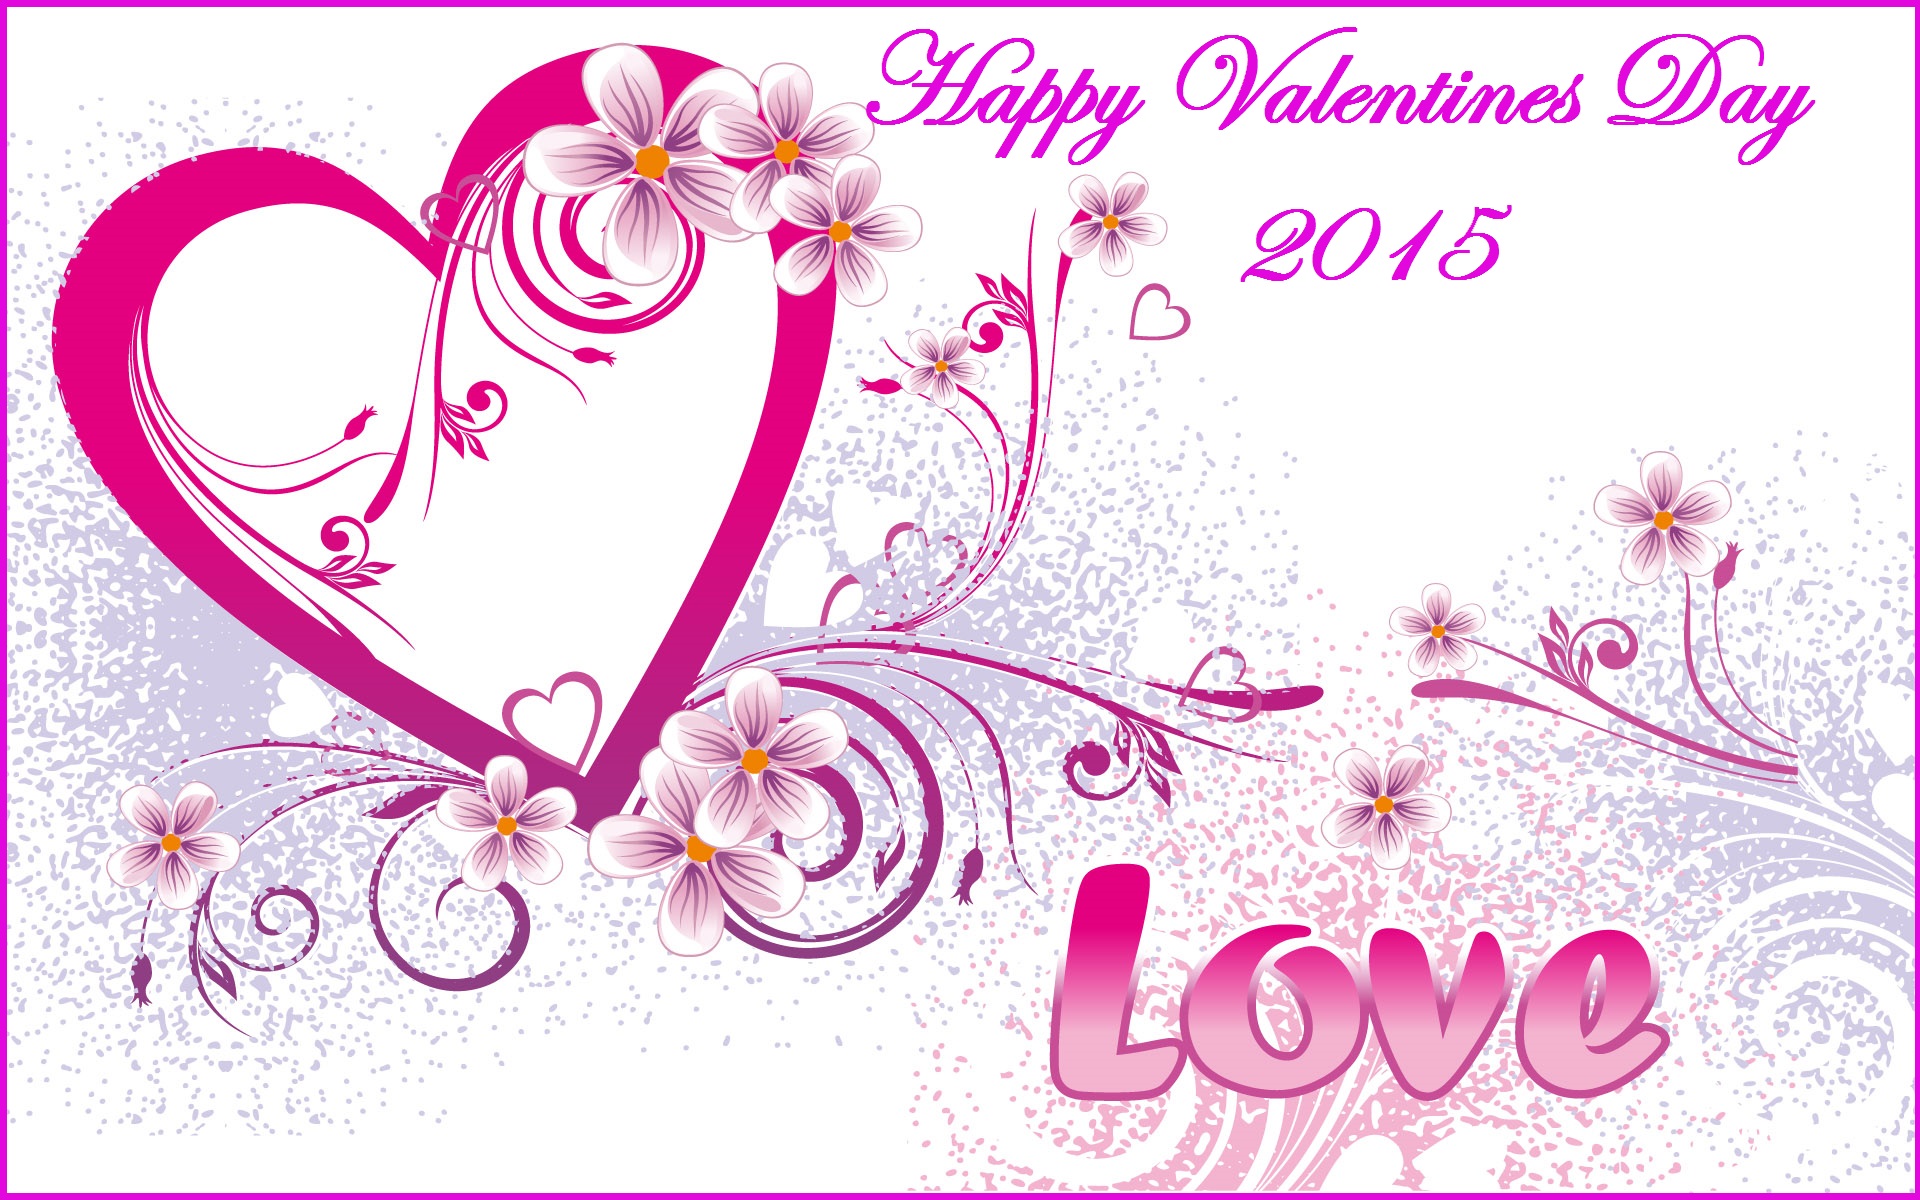 Happy Valentines Day 2015 Image with Pink heart & flowers for Whatsapp FB 